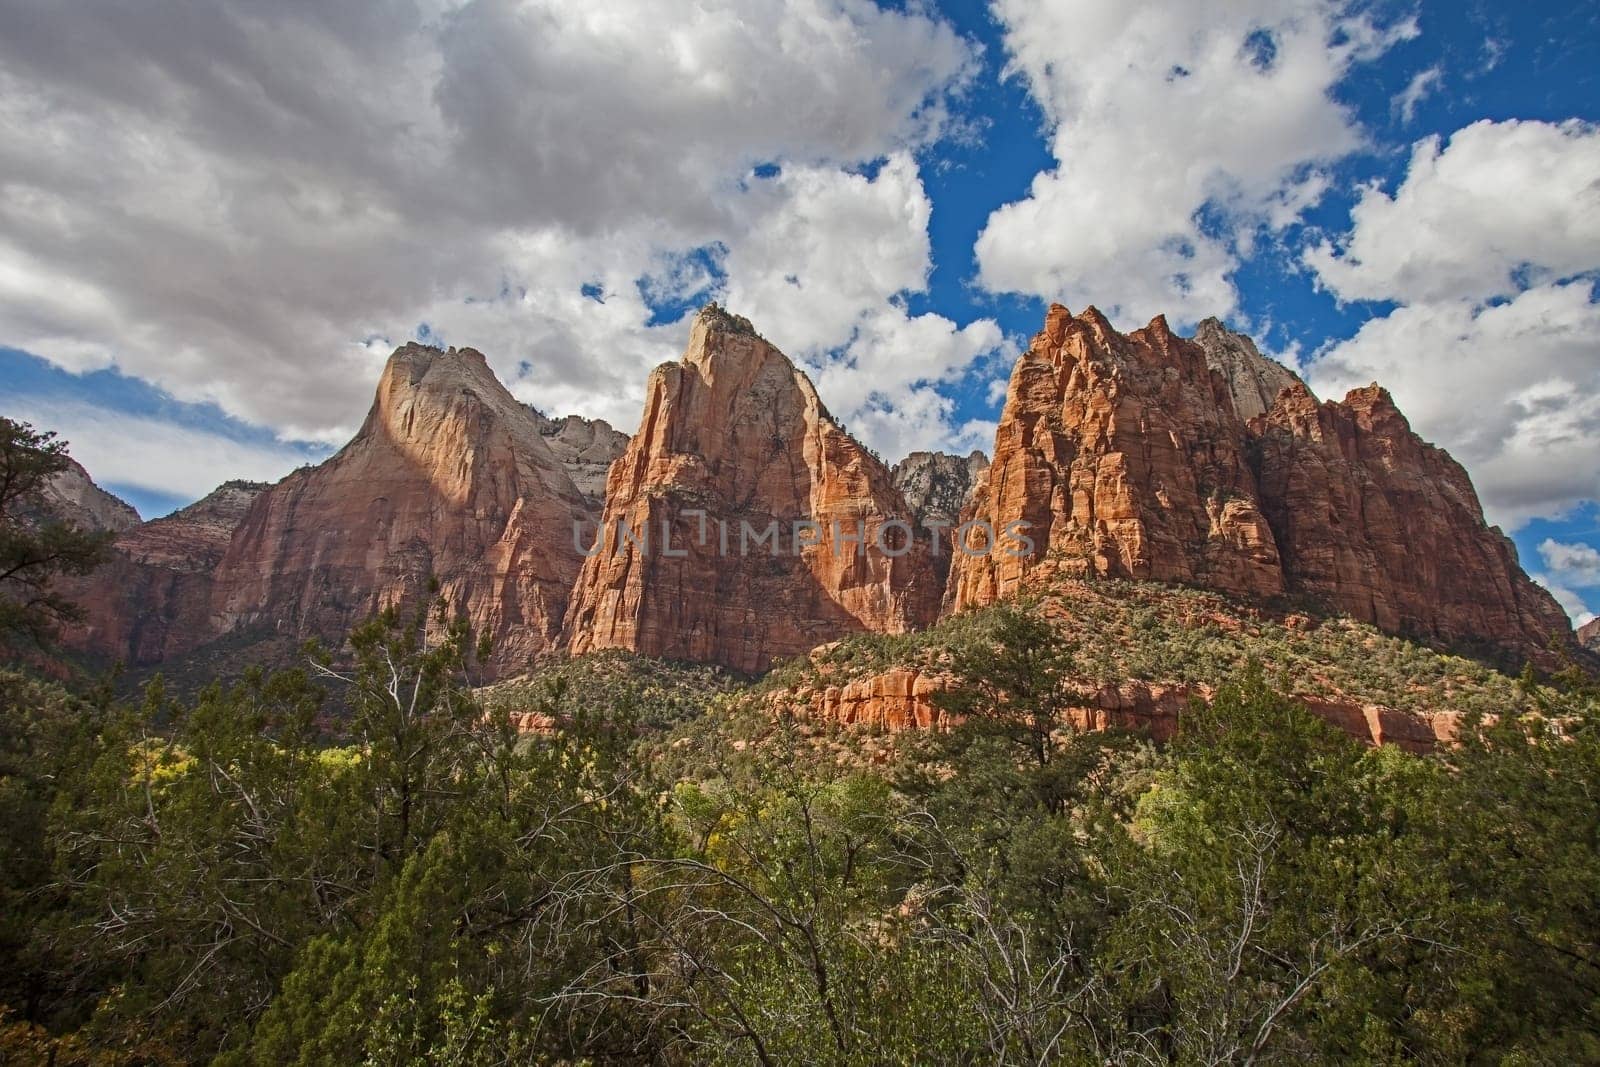 Three sandstone peaks in the west of Zion Canyon known as the Three Patriarchs